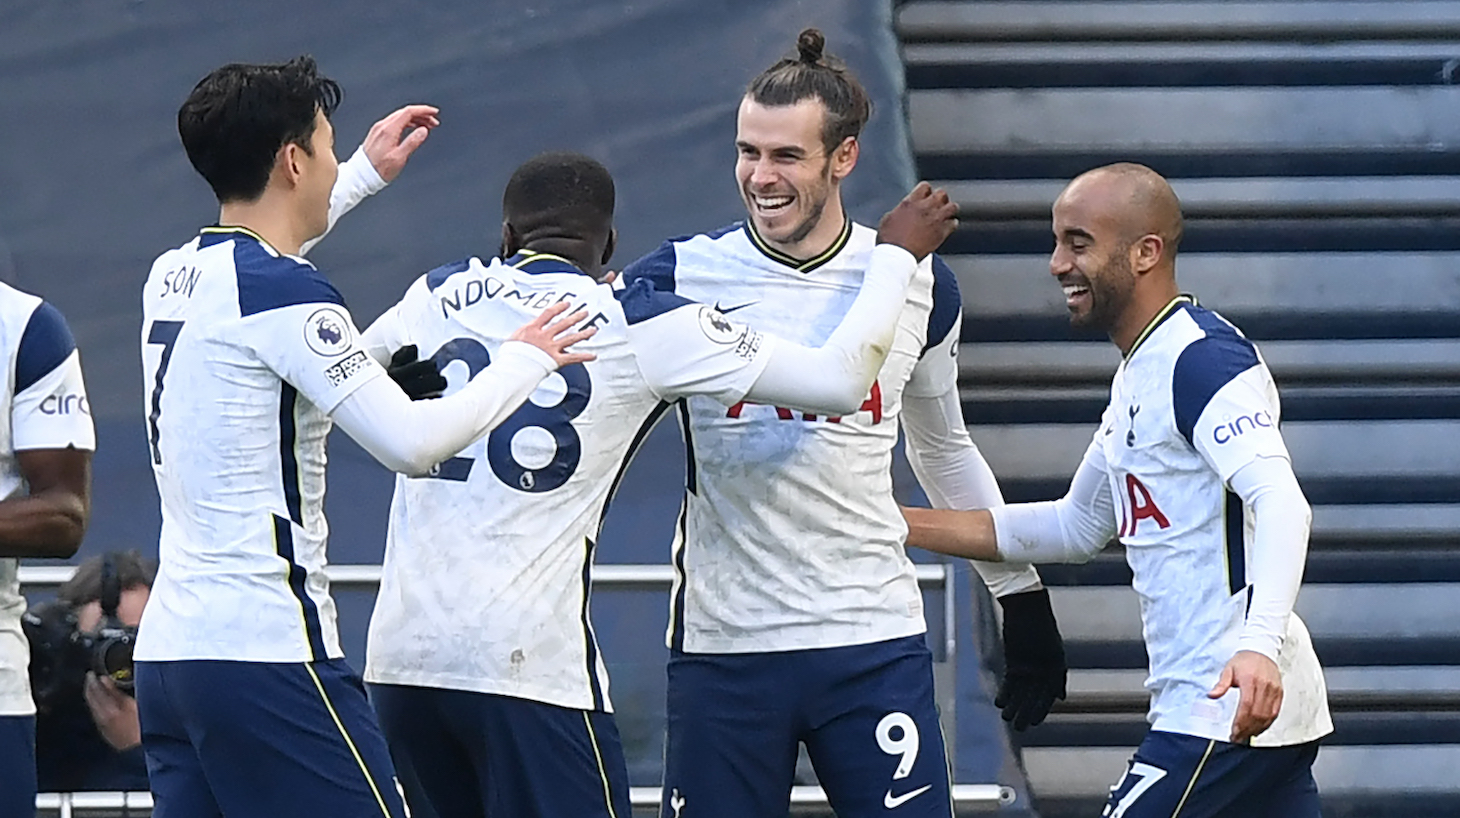 Tottenham Hotspur's Welsh striker Gareth Bale (C) celebrates with teammates after scoring their fourth goal during the English Premier League football match between Tottenham Hotspur and Burnley at Tottenham Hotspur Stadium in London, on February 28, 2021.